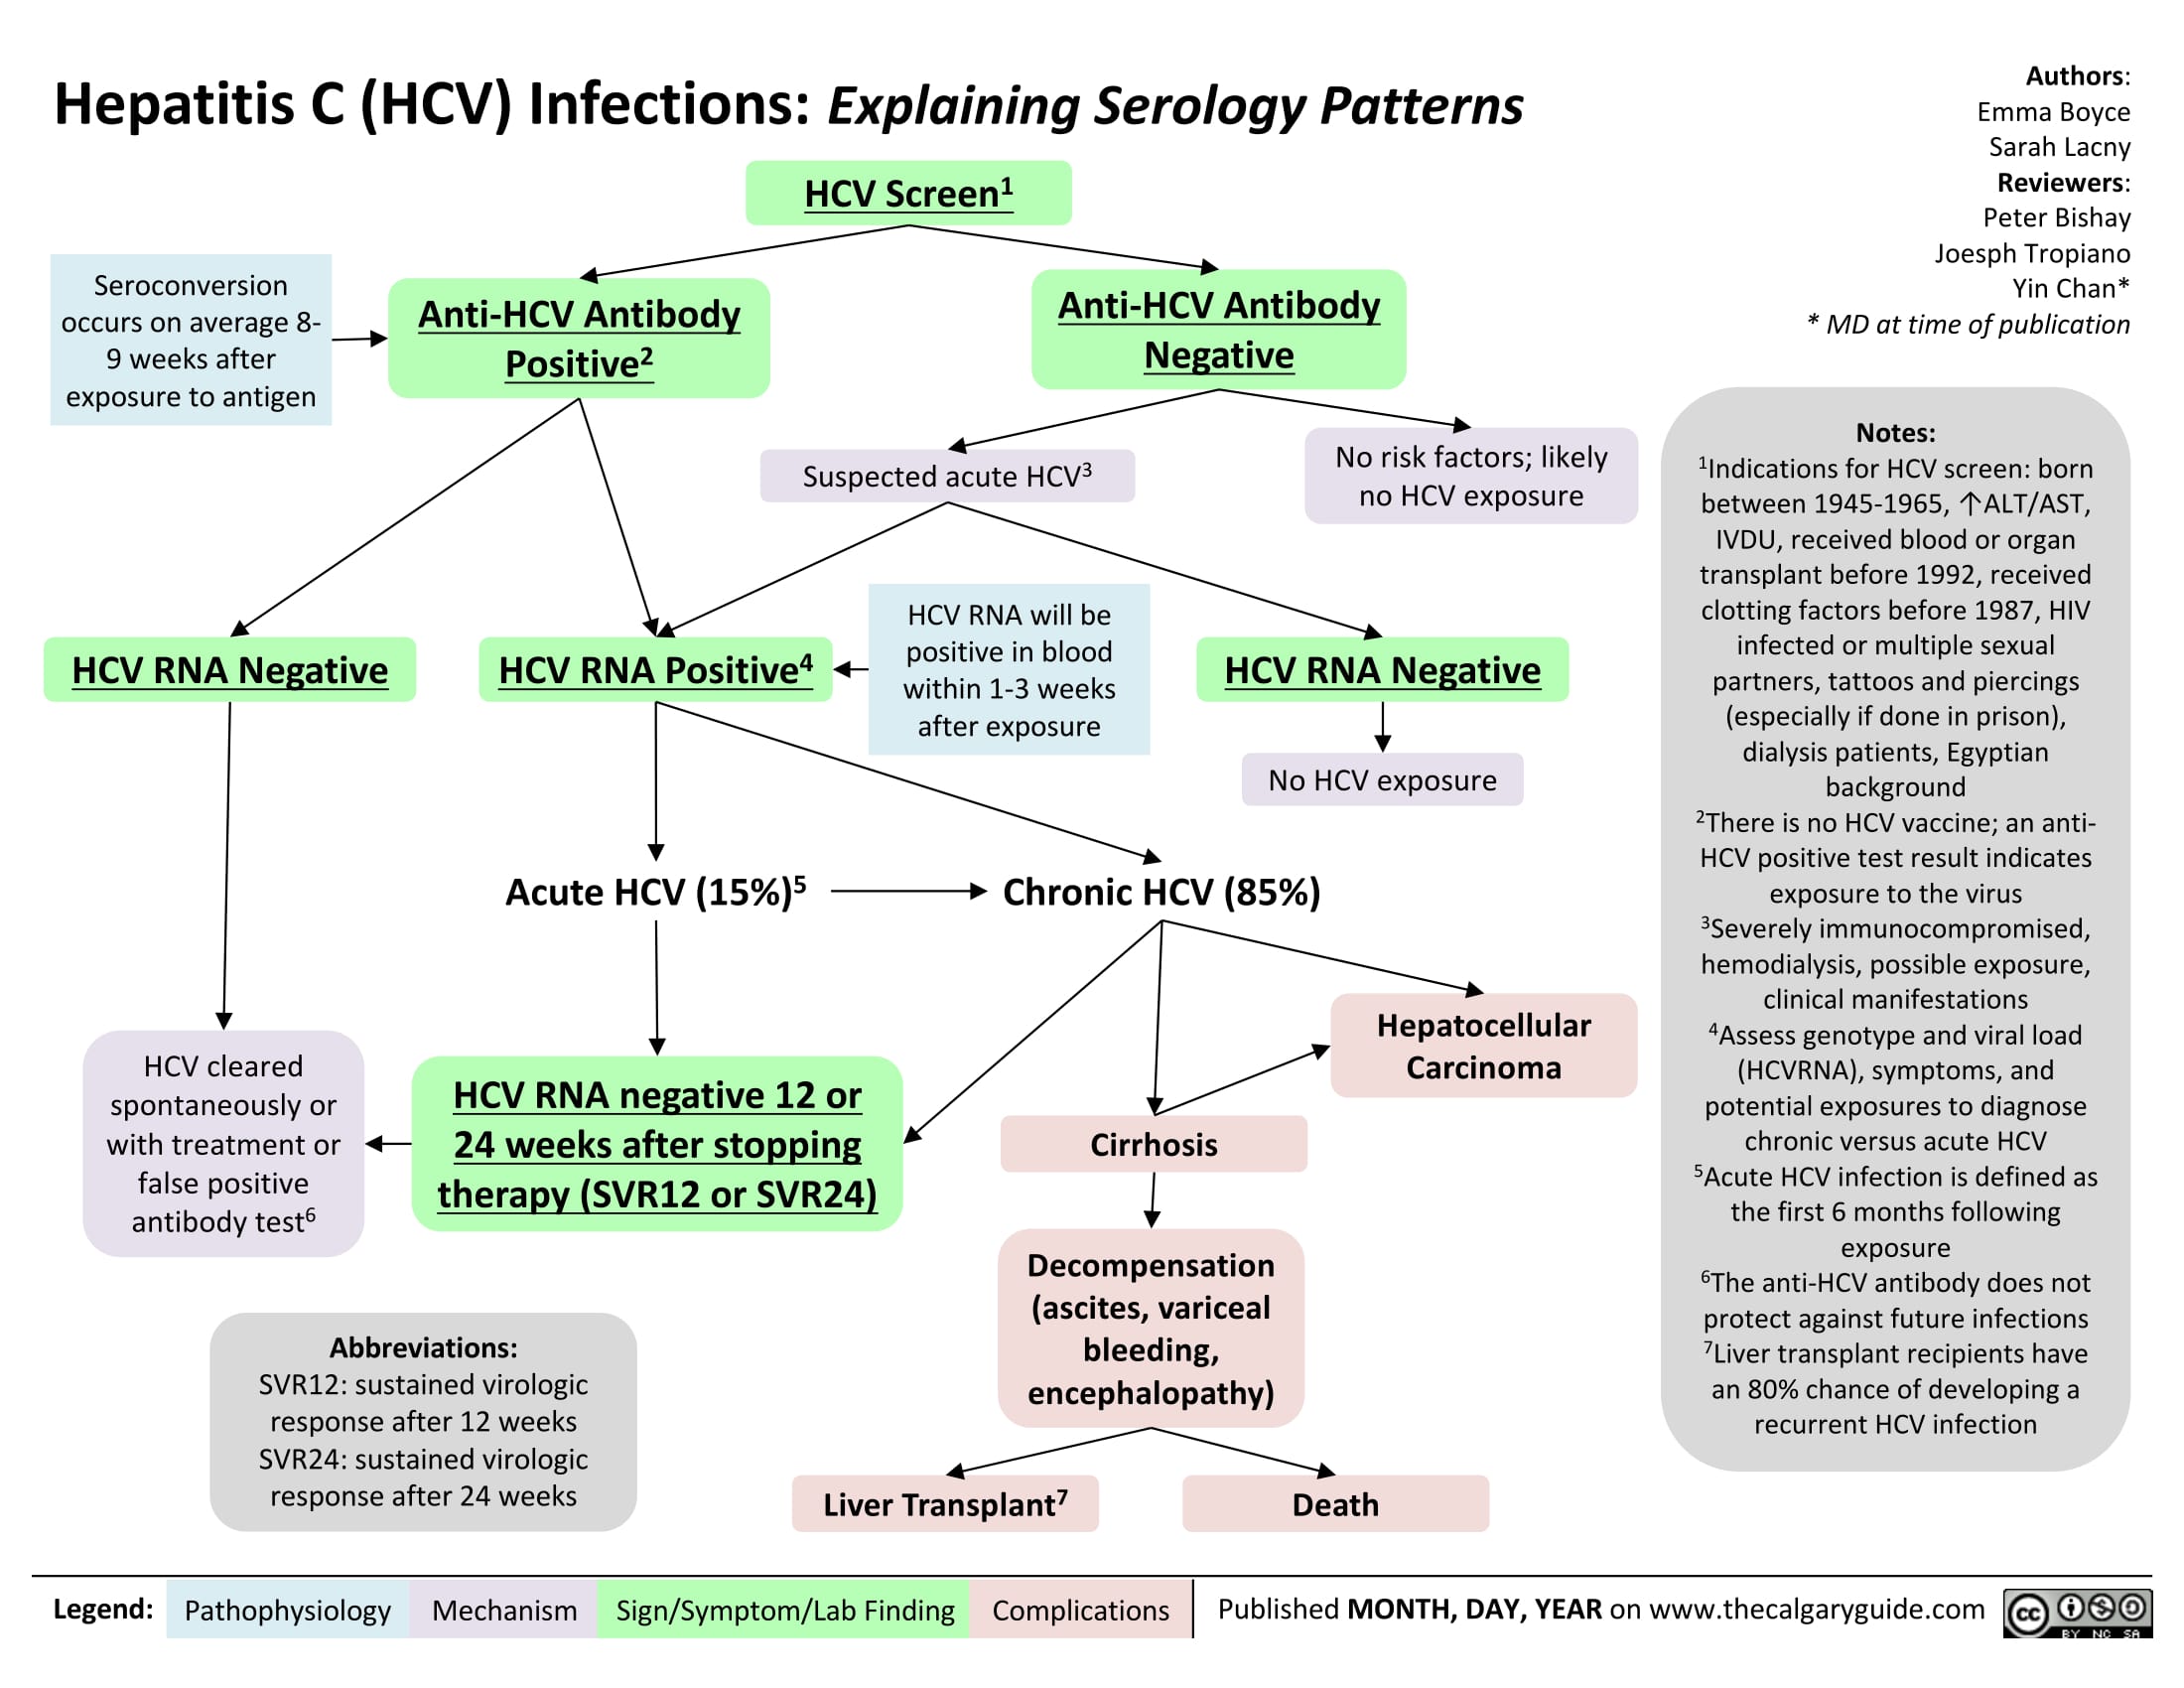 Hepatitis C (HCV) Infections: Explaining Serology Patterns 

Seroconversion occurs on average 8-9 weeks after exposure to antigen 
H CV RNA Negative 
Anti-HCV Antibody Positive2 
HCV RNA Positive4 
1 HCV Screen  
Anti-HCV Antibody Negative  
Suspected acute HCV3 
HCV RNA will be positive in blood within 1-3 weeks after exposure 
No risk factors; likely no HCV exposure 
HCV RNA Negative 
No HCV exposure 

HCV cleared spontaneously or with treatment or false positive antibody test6 
Acute HCV (15%) 5Chronic HCV (85%) 


HCV RNA negative 12 or 24 weeks after stopping therapy (SVR12 or  SVR24)  
Abbreviations: SVR12: sustained virologic response after 12 weeks SVR24: sustained virologic response after 24 weeks 
Hepatocellular Carcinoma 
Cirrhosis 

Decompensation (ascites, variceal bleeding, encephalopathy) 
7 Liver Transplant 
Death 
Authors: Emma Boyce Sarah Lacny Reviewers: Peter B i s h ay Joesph Tropiano Yin Chan* * MD at time of publication 
Notes: 1Indications for HCV screen: born between 1945-1965, ↑ALT/AST, IVDU, received blood or organ transplant before 1992, received clotting factors before 1987, HIV infected or multiple sexual partners, tattoos and piercings (especially if done in prison), dialysis patients, Egyptian background 2There is no HCV vaccine; an anti-HCV positive test result indicates exposure to the virus 3Seve re l y immunocompromised, hemodialysis, possible exposure, clinical manifestations 4Assess genotype and viral load (HCVRNA), symptoms, and potential exposures to diagnose chronic versus acute HCV 5Acute HCV infection is defined as the first 6 months following exposure 6The anti-HCV antibody does not protect against future infections 7Liver transplant recipients have an 80% chance of developing a recurrent HCV infection 
Legend: 
Pathophysiology 
Mechanism 
Sign/Symptom/Lab Finding 
Complications 
Published NOVEMBER 12, 2017 on www.thecalgaryguide.com 
